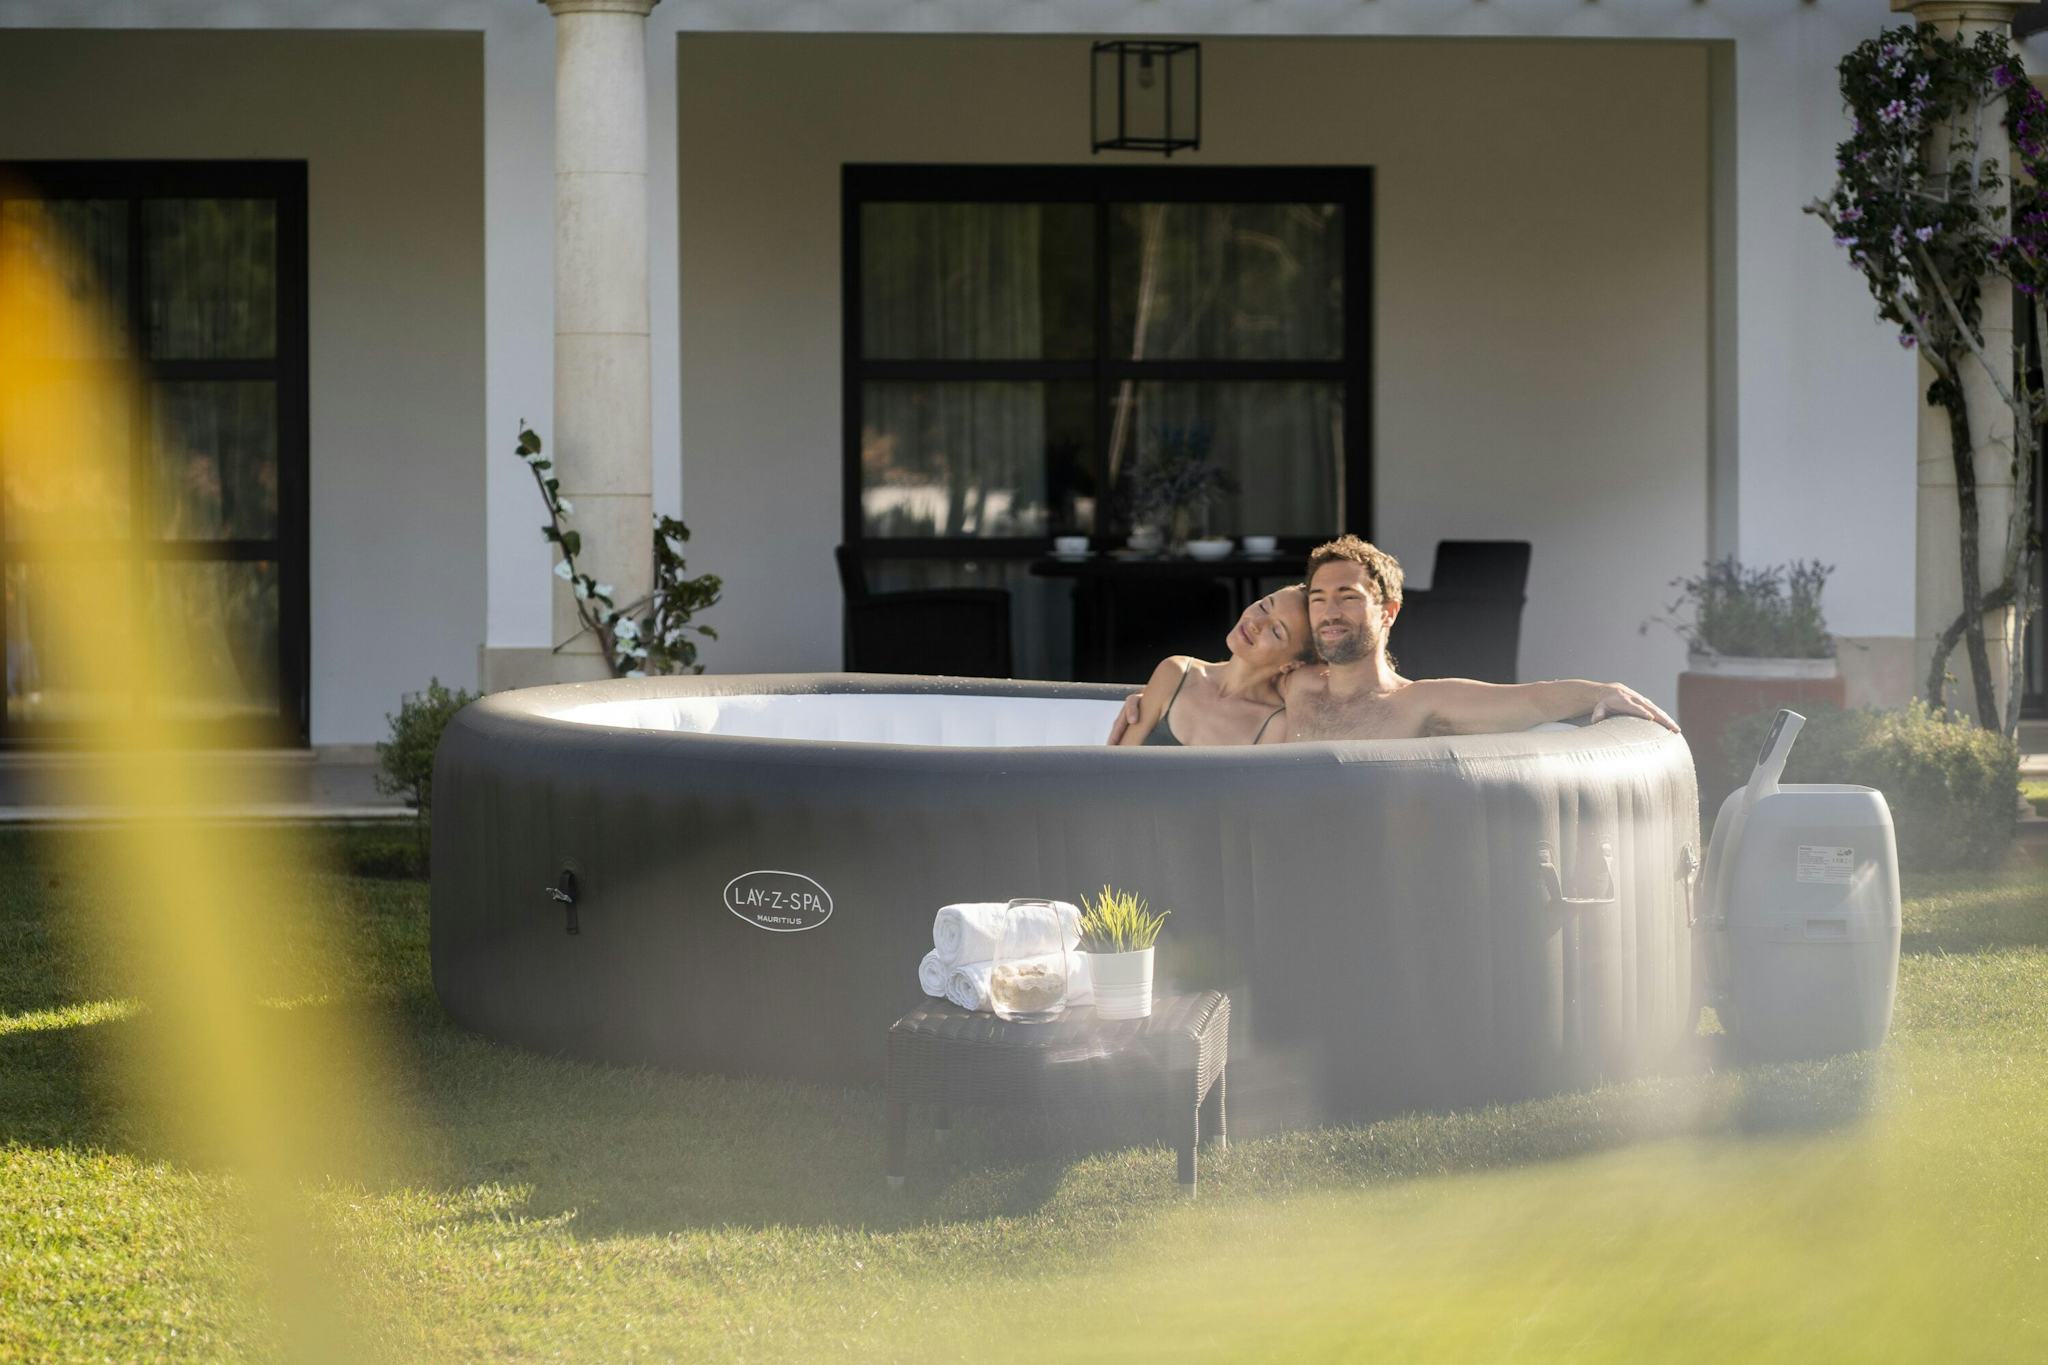 Spas Gonflables Spa gonflable ovale Lay-Z-Spa Mauritius Airjet™ 5 - 7 personnes Bestway 15